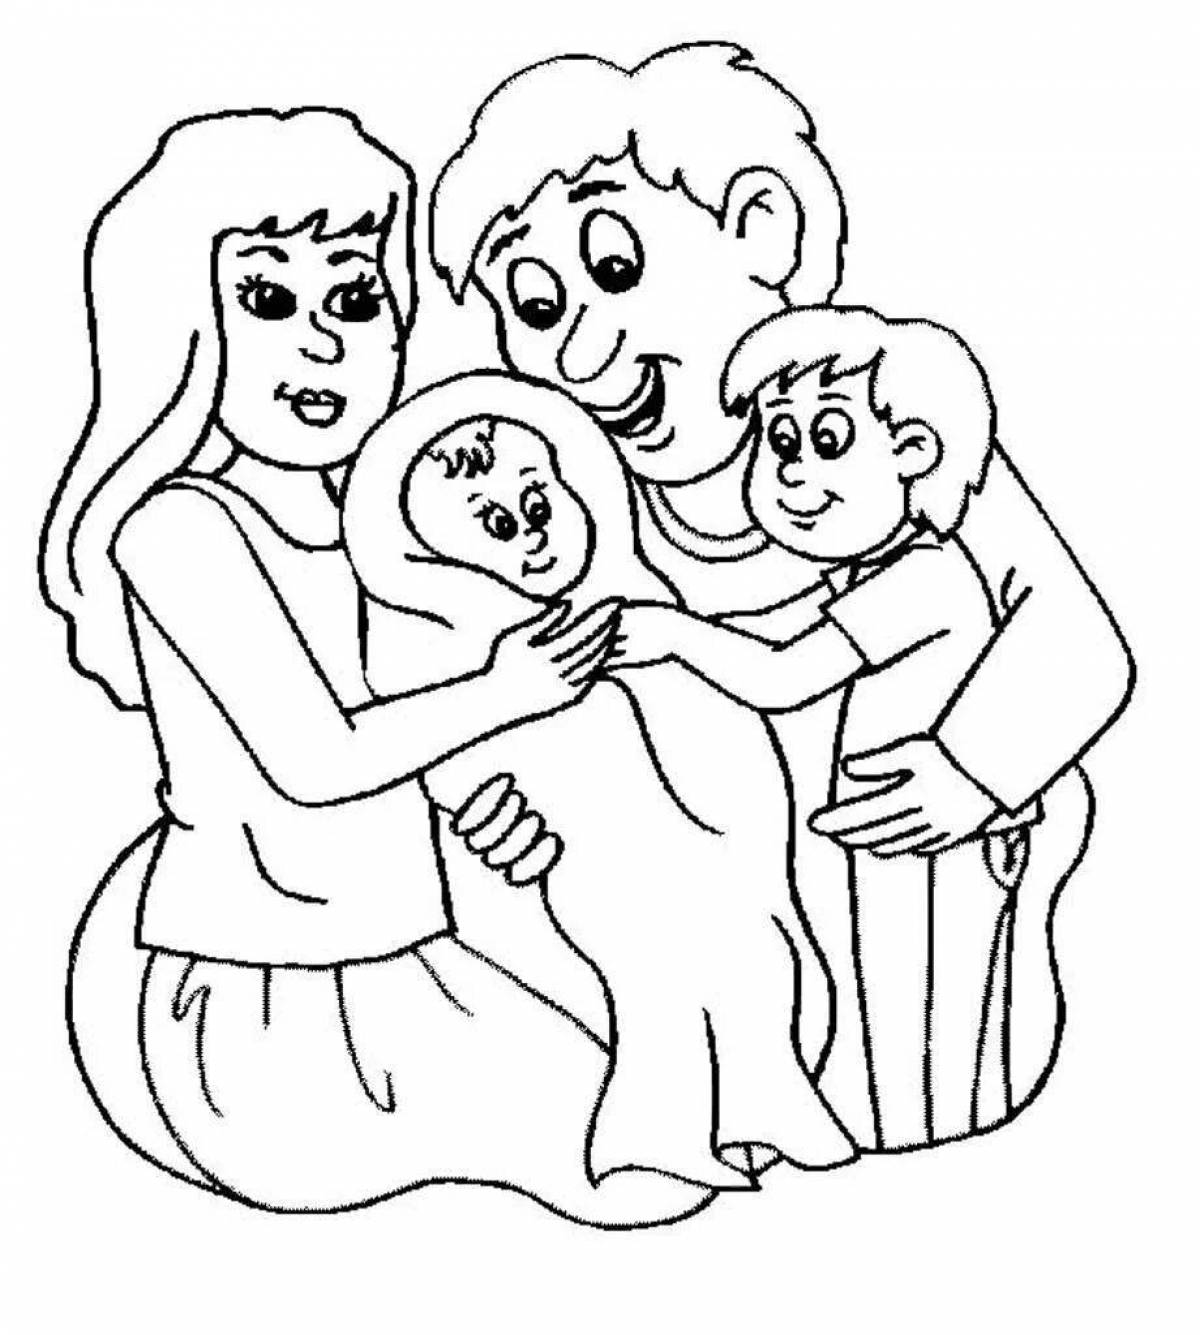 Exquisite family coloring book for kids